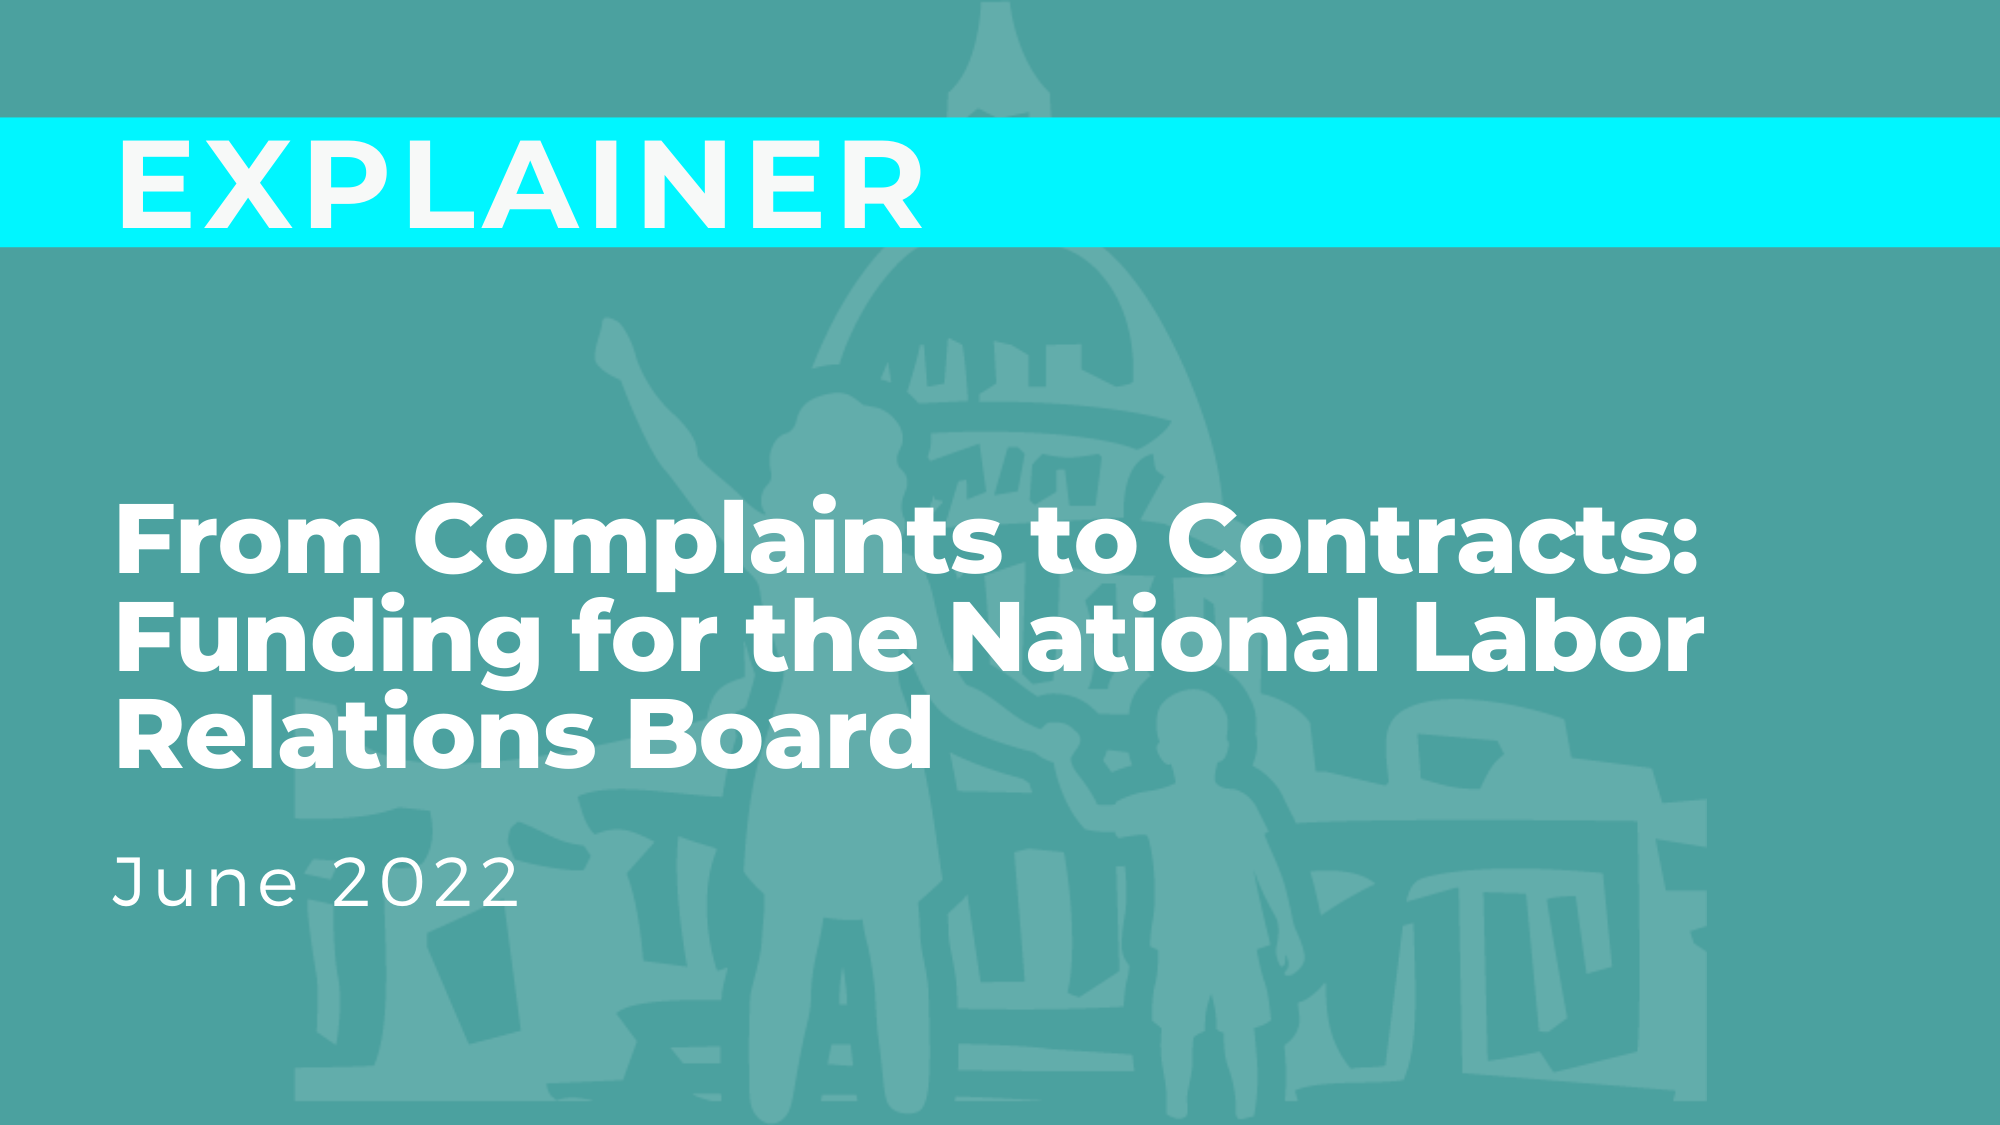 From Complaints to Contracts: Funding for the National Labor Relations Board